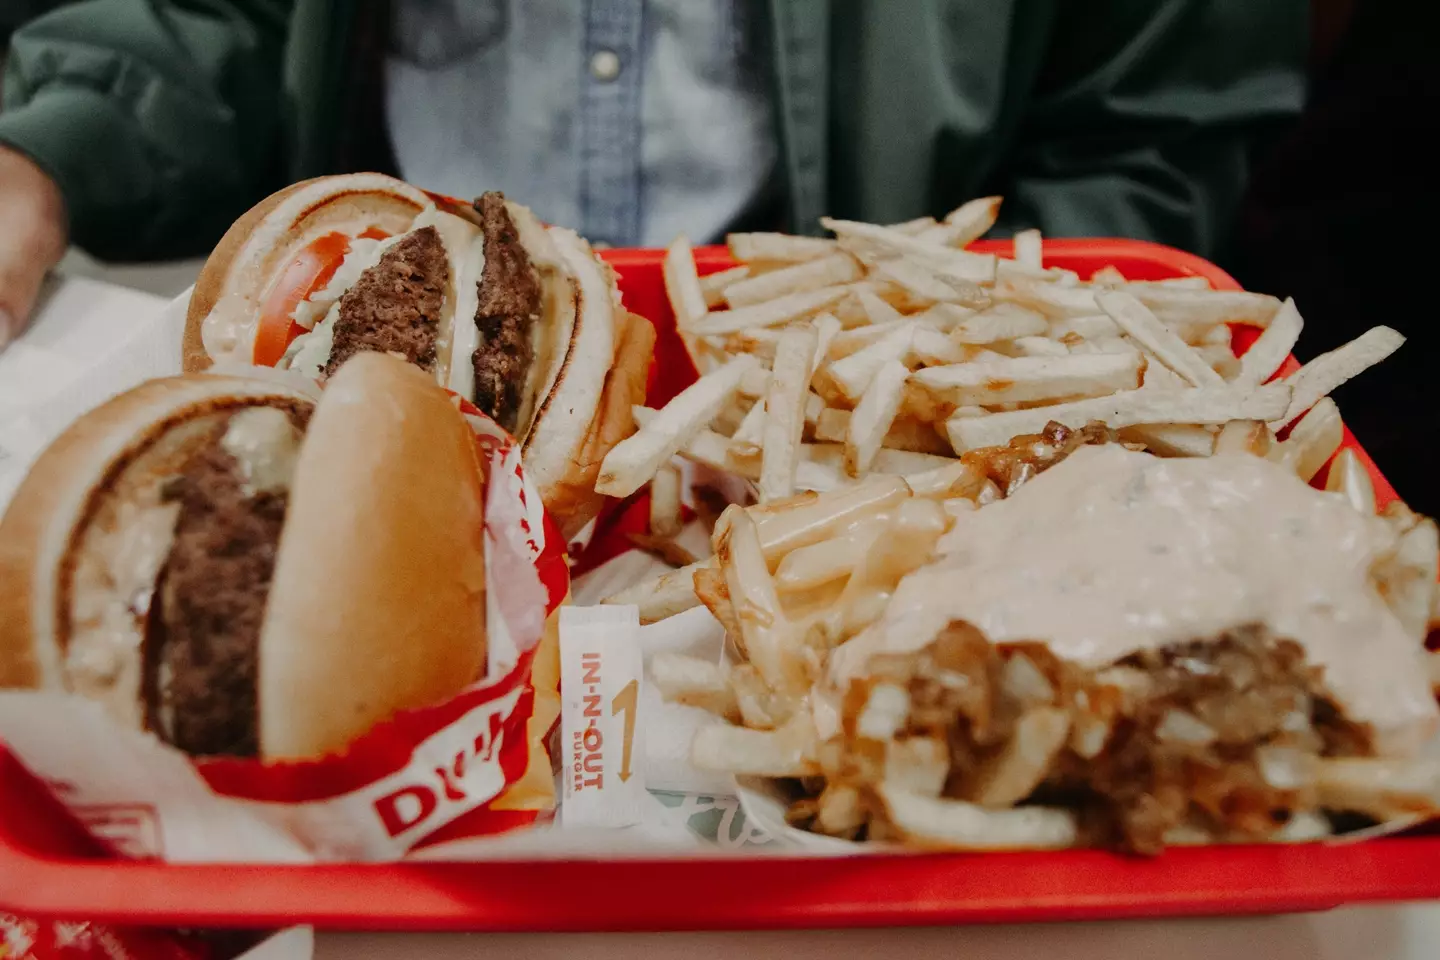 In-N-Out Burger is known for its double-doubles and 'animal style' fries.